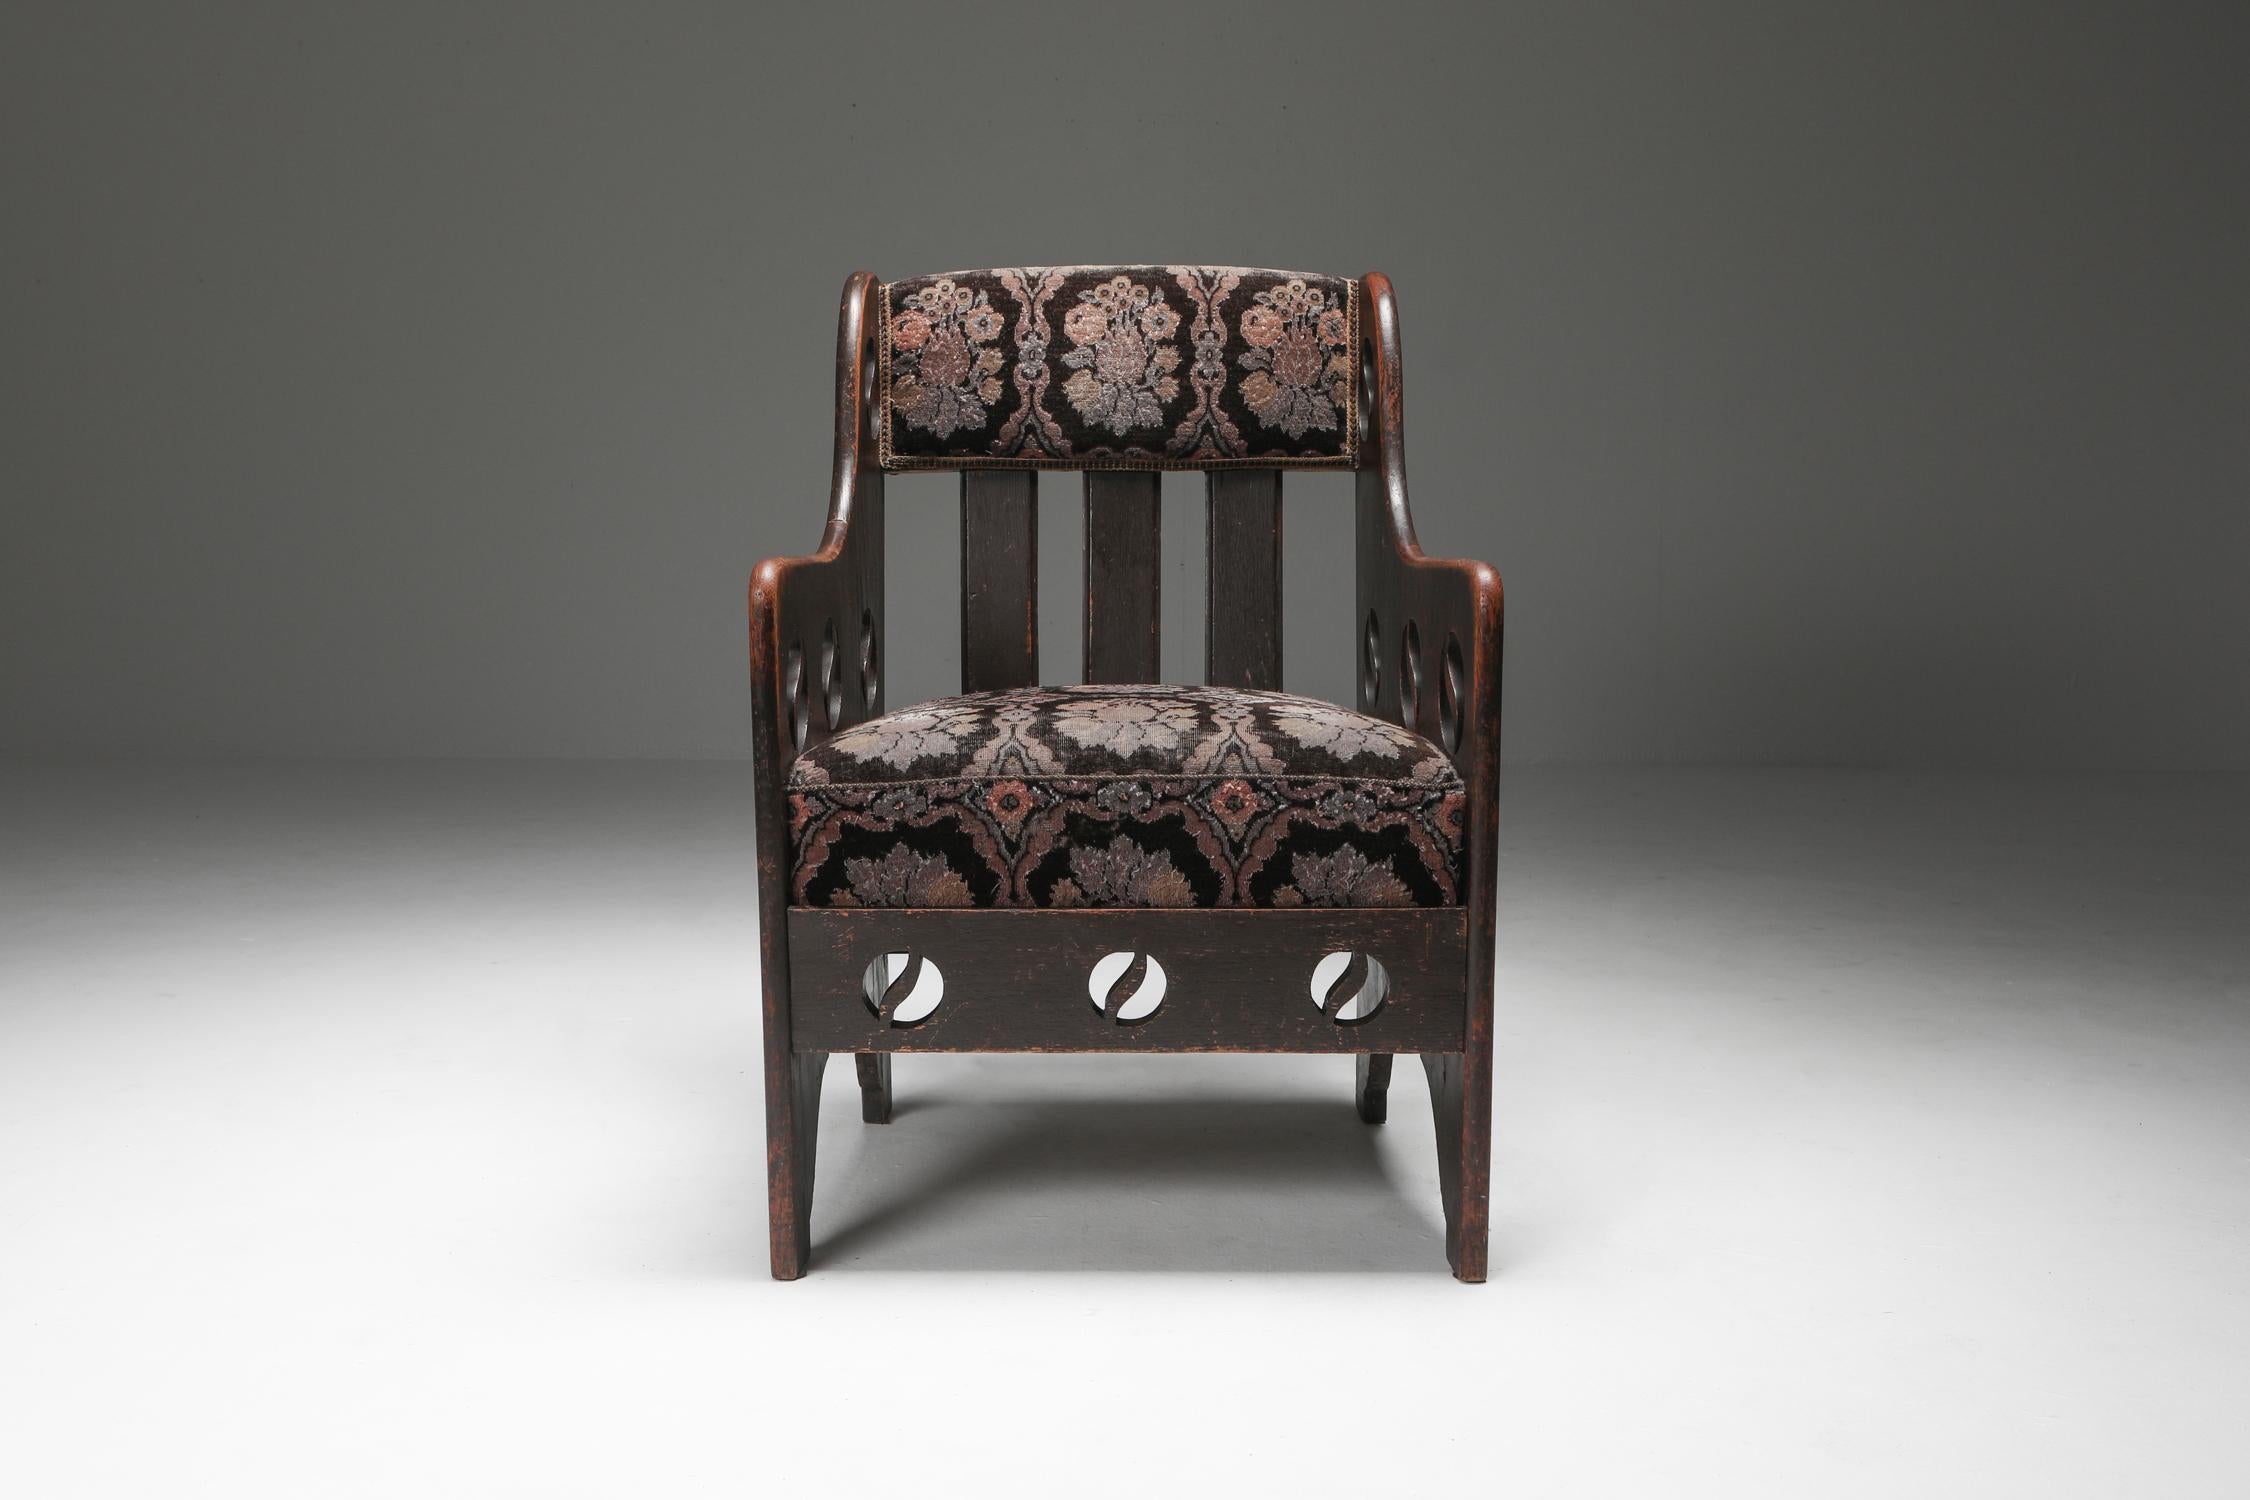 Early modern armchair from Sweden, approximately dating back to 1920, crafted from stained oak and preserved in its original condition. While the upholstery showcases elements of Expressionist design, the overall essence of the armchair exudes a